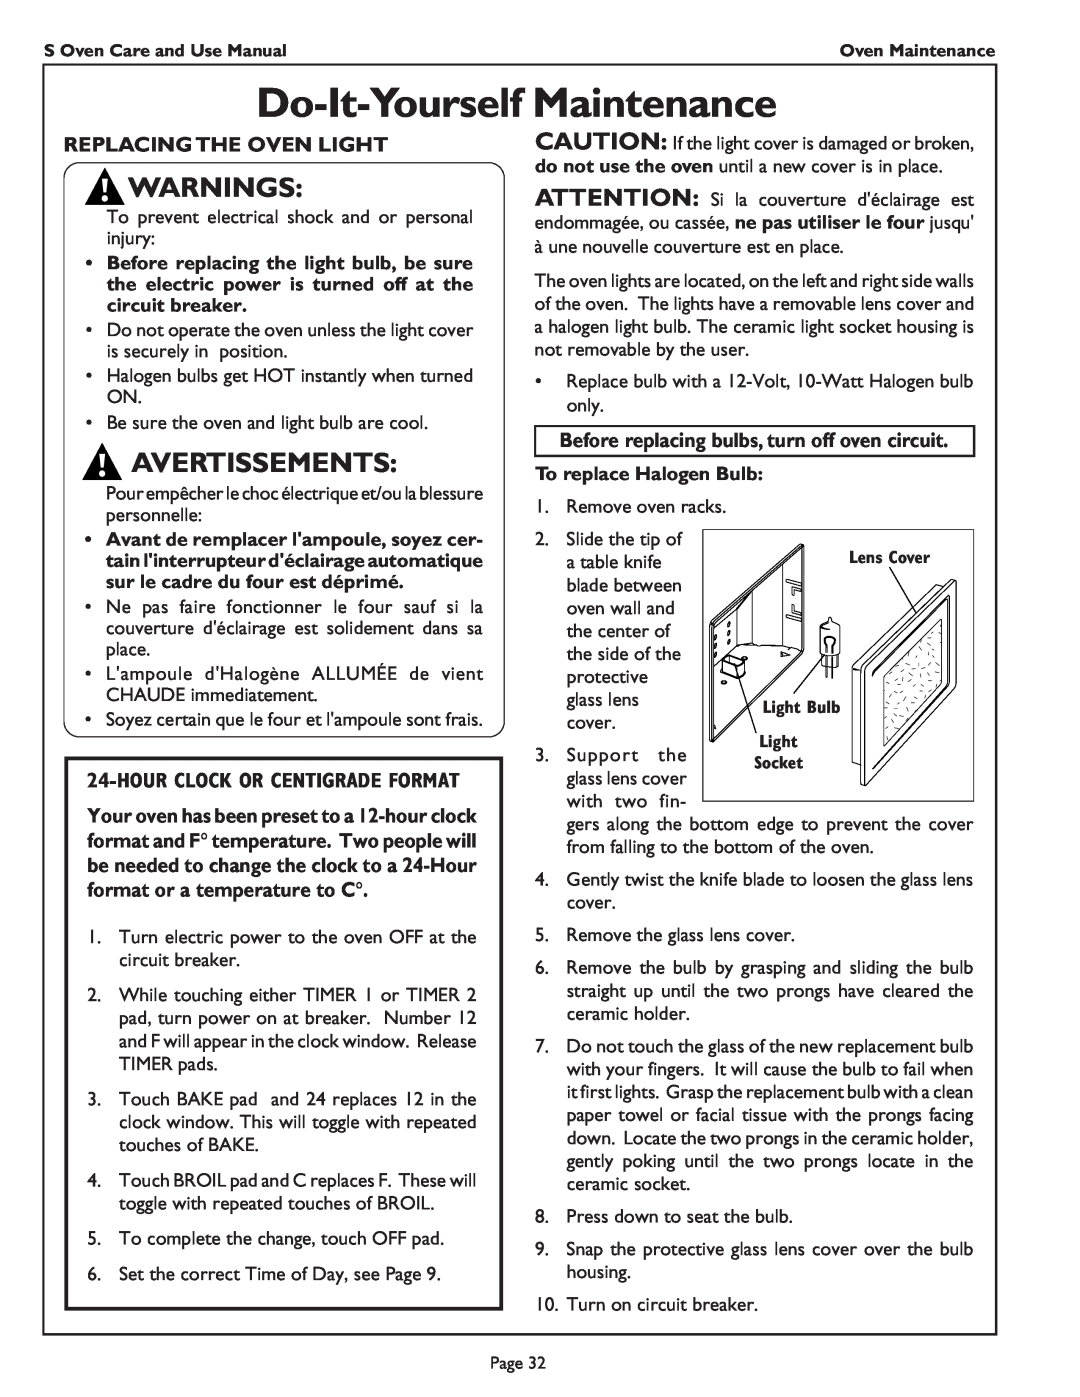 Thermador SC272 Do-It-YourselfMaintenance, Warnings, Avertissements, Replacing The Oven Light, To replace Halogen Bulb 